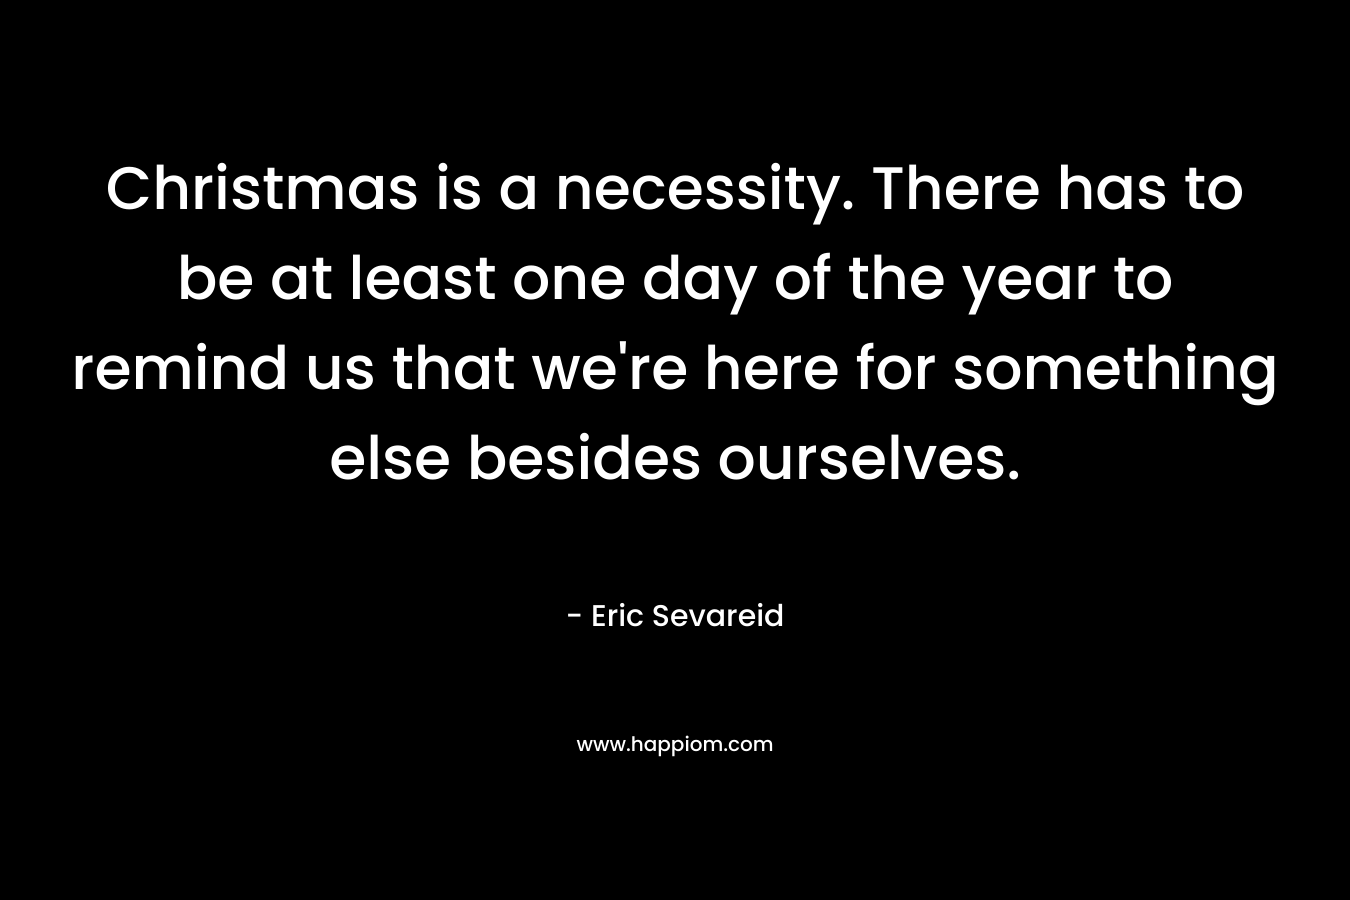 Christmas is a necessity. There has to be at least one day of the year to remind us that we’re here for something else besides ourselves. – Eric Sevareid